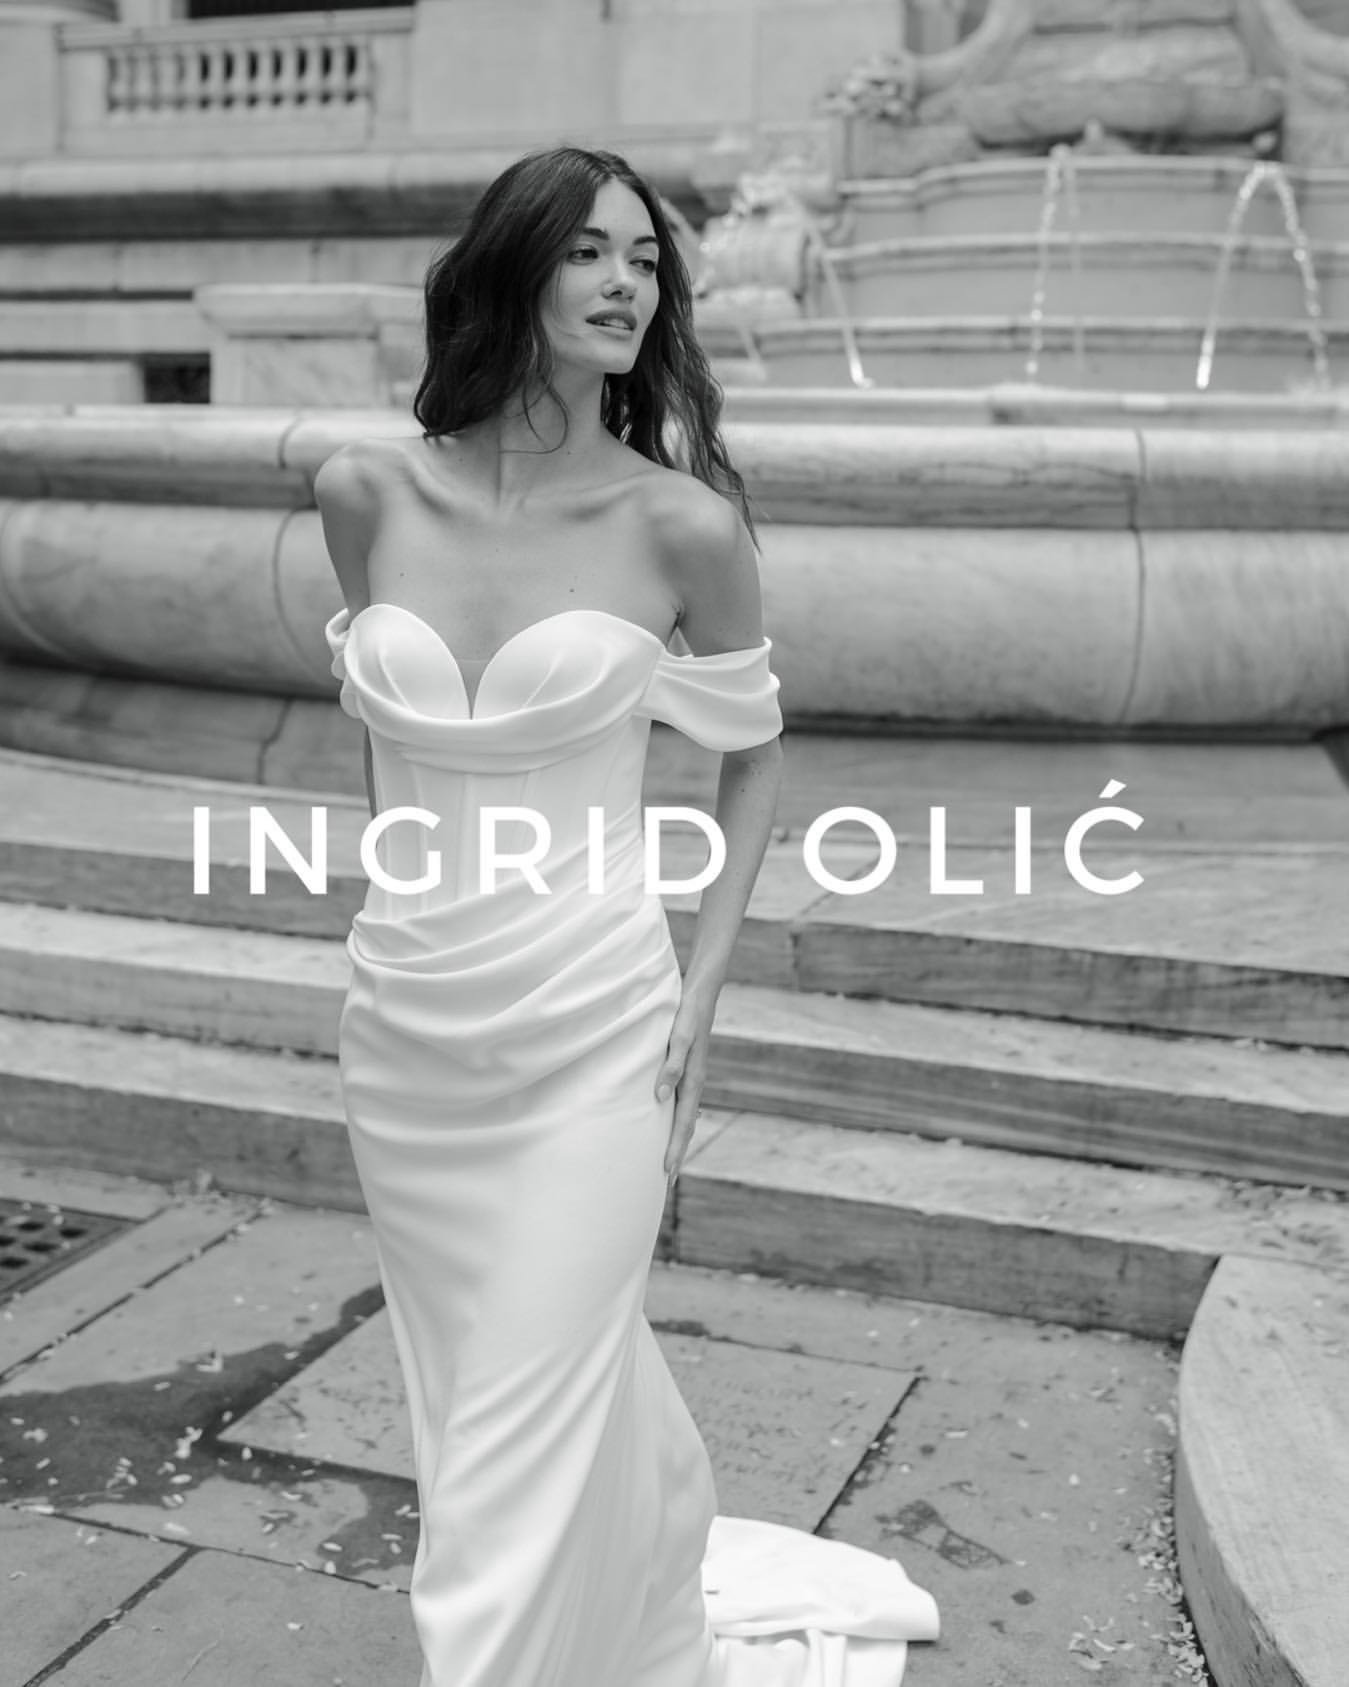 ARIA | A dance of romance, sultriness and sophistication, interwoven into contemporary silhouettes that flatter the feminine form.

Try her on during our exclusive INGRID OLIĆ Trunk Show 9th - 26th May.

@sofiaareynal 
@kristinpiteophoto 
@claudia_oy